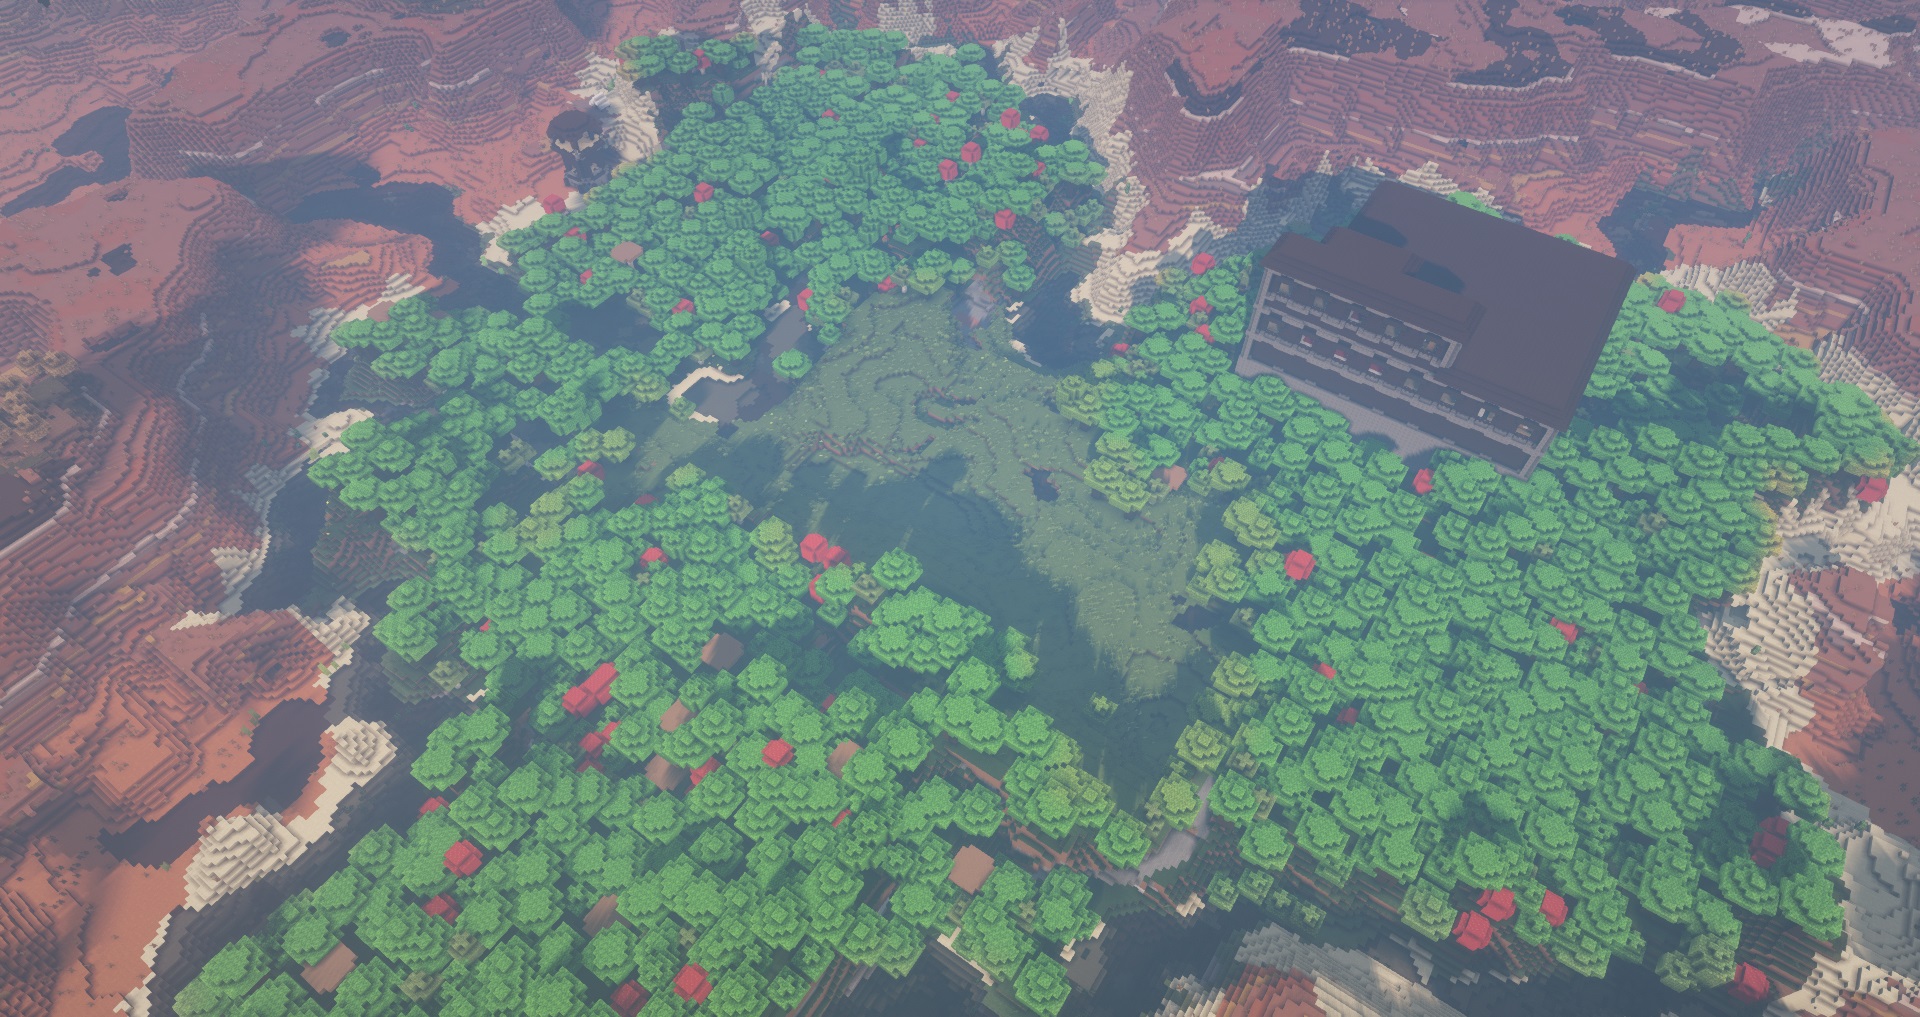 Minecraft seed - an aerial view of a forest shaped like a heart with a large mansion inside